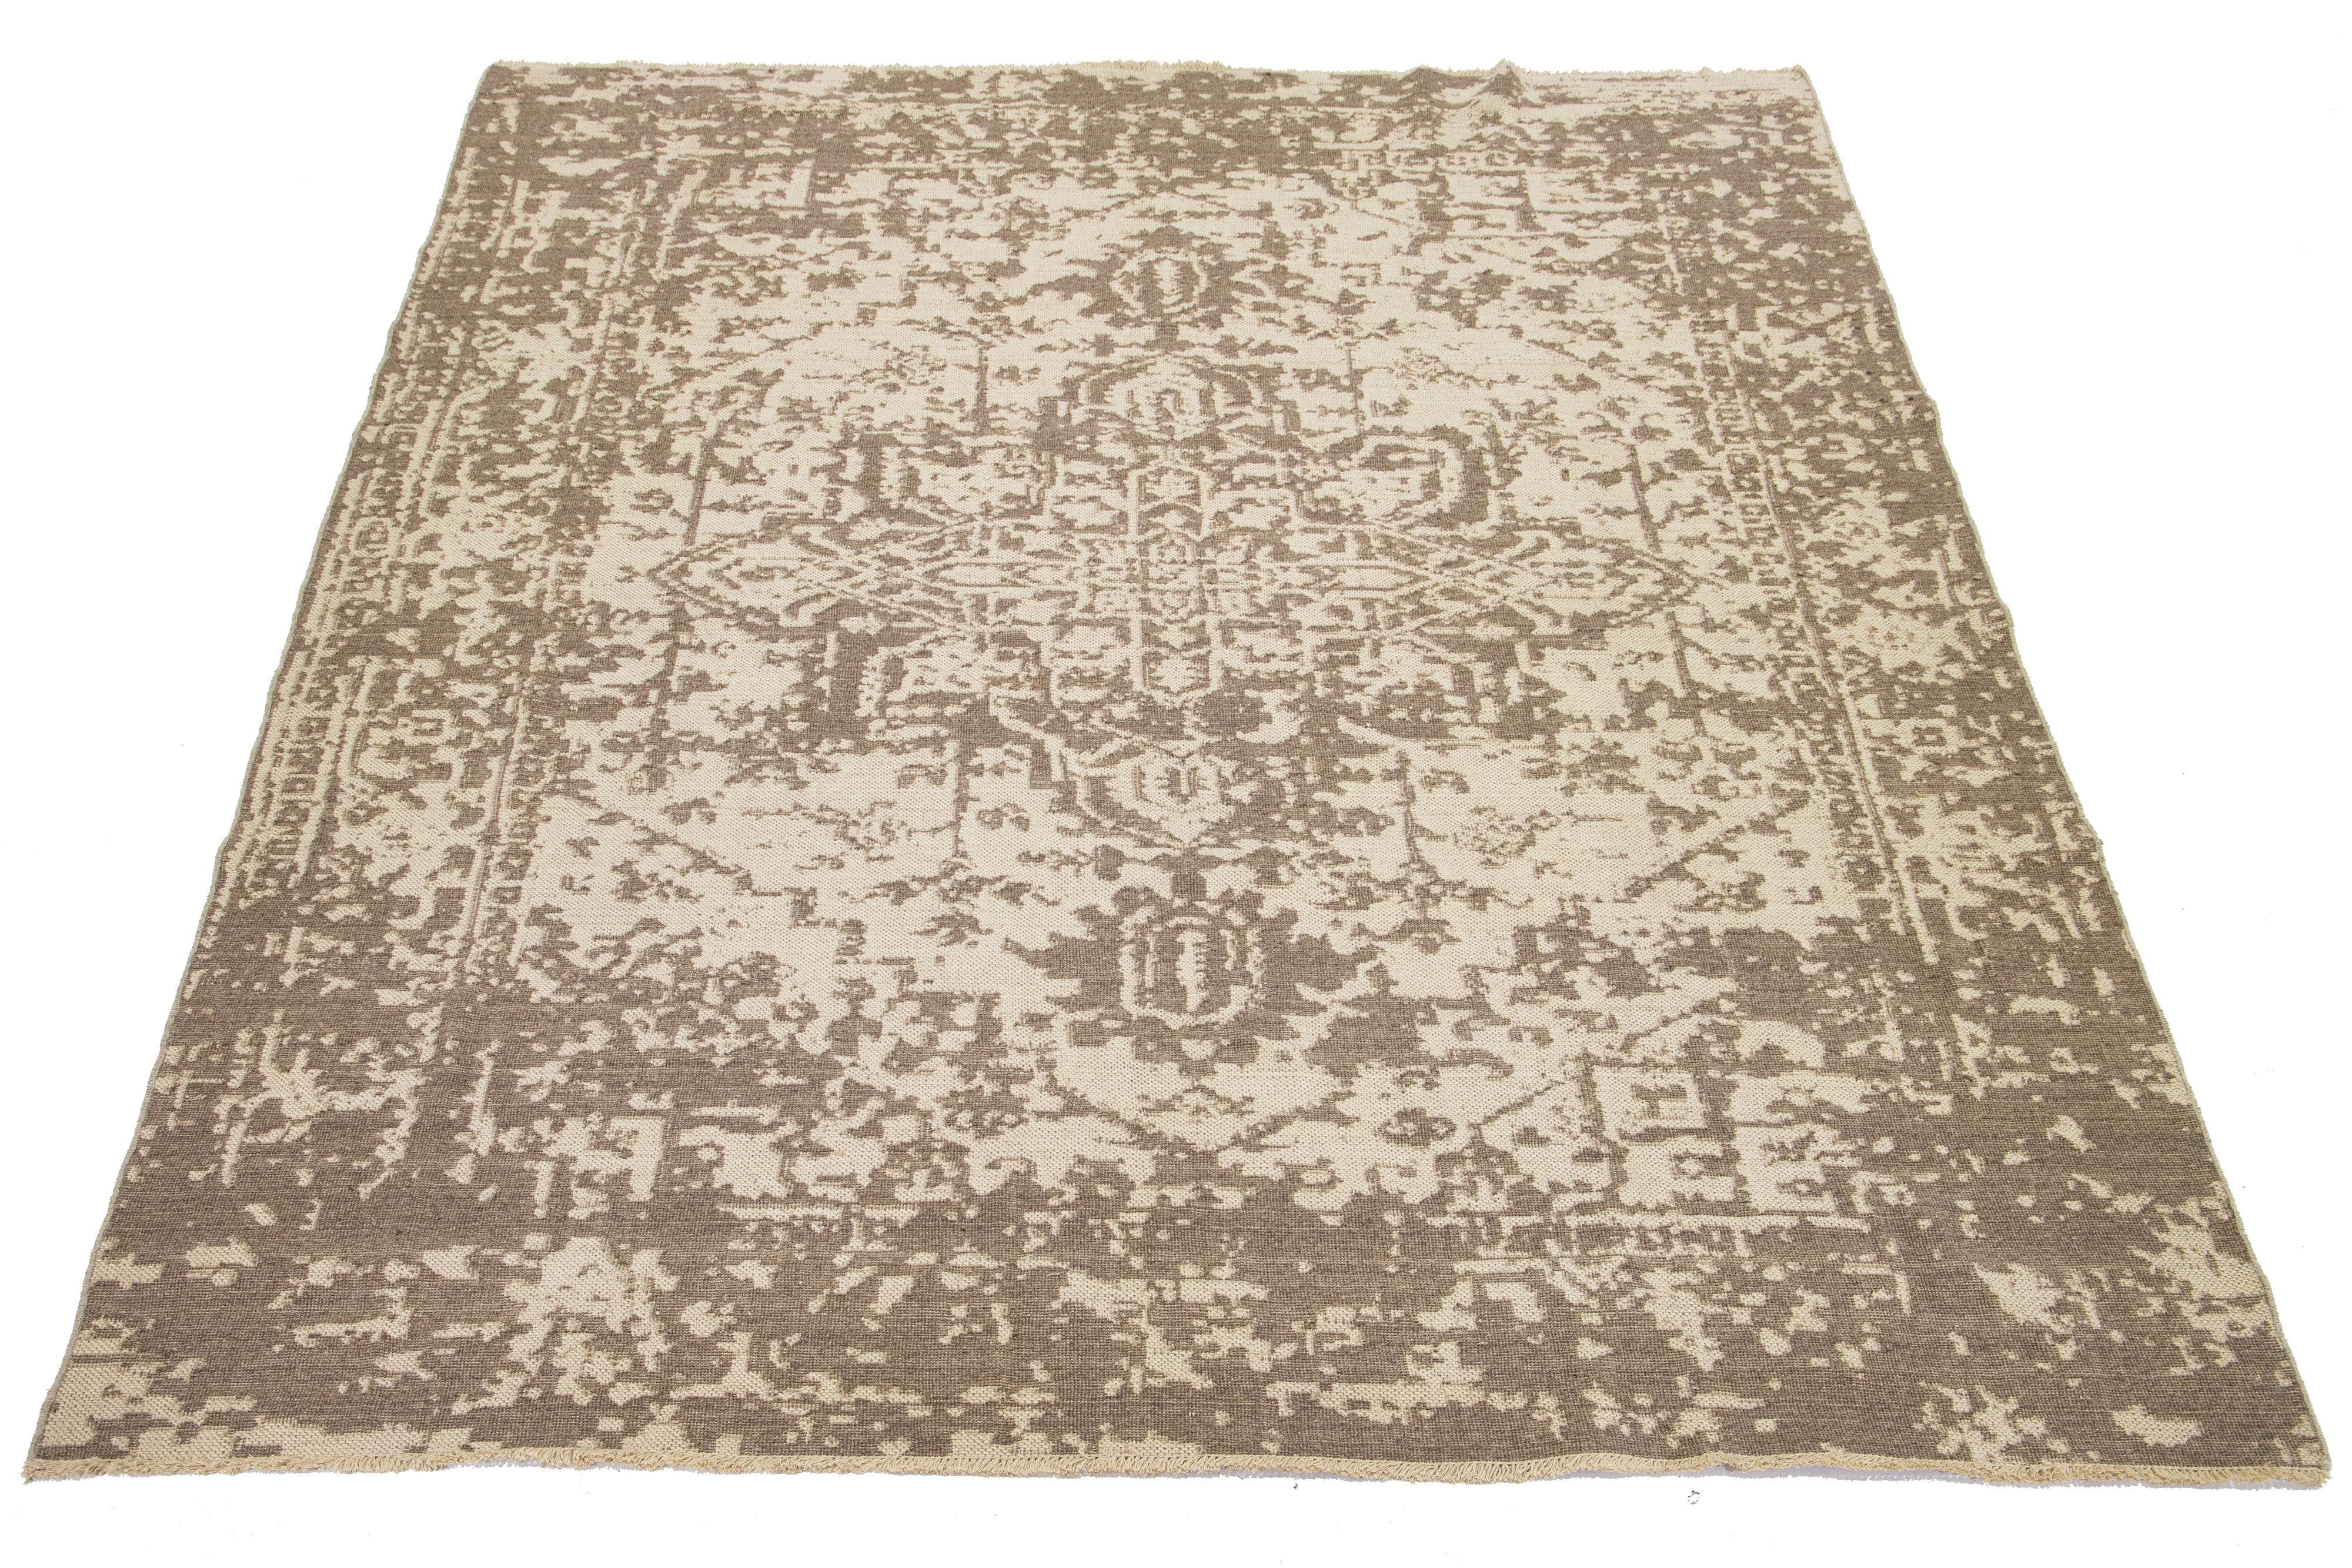 This hand-loomed wool rug features a beautiful beige background with a medallion motif in brown that covers the entire rug. 

This rug measures 9'6